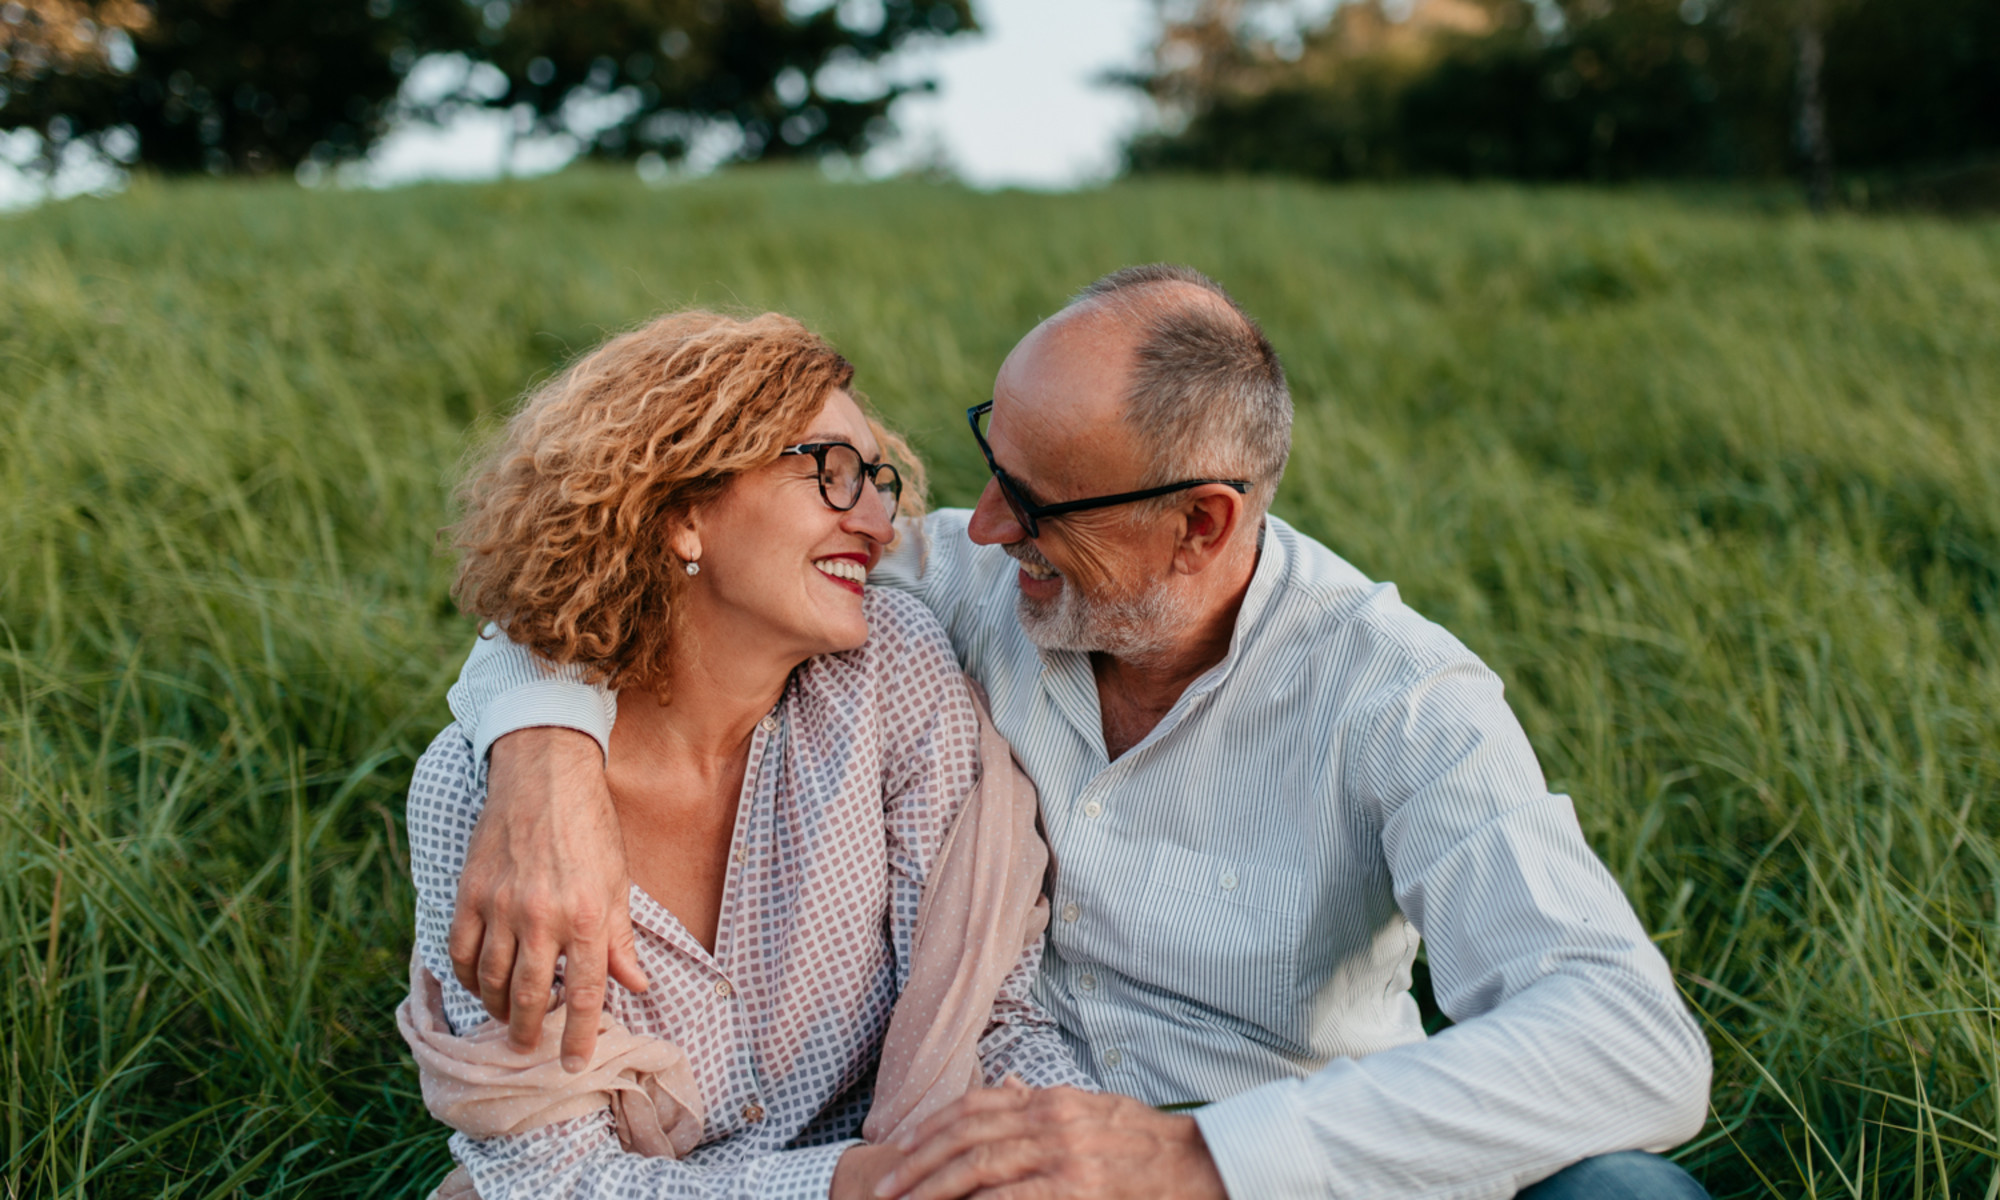 15 Ways To Make Your Wife Happy (Backed By Experts and Science) mindbodygreen